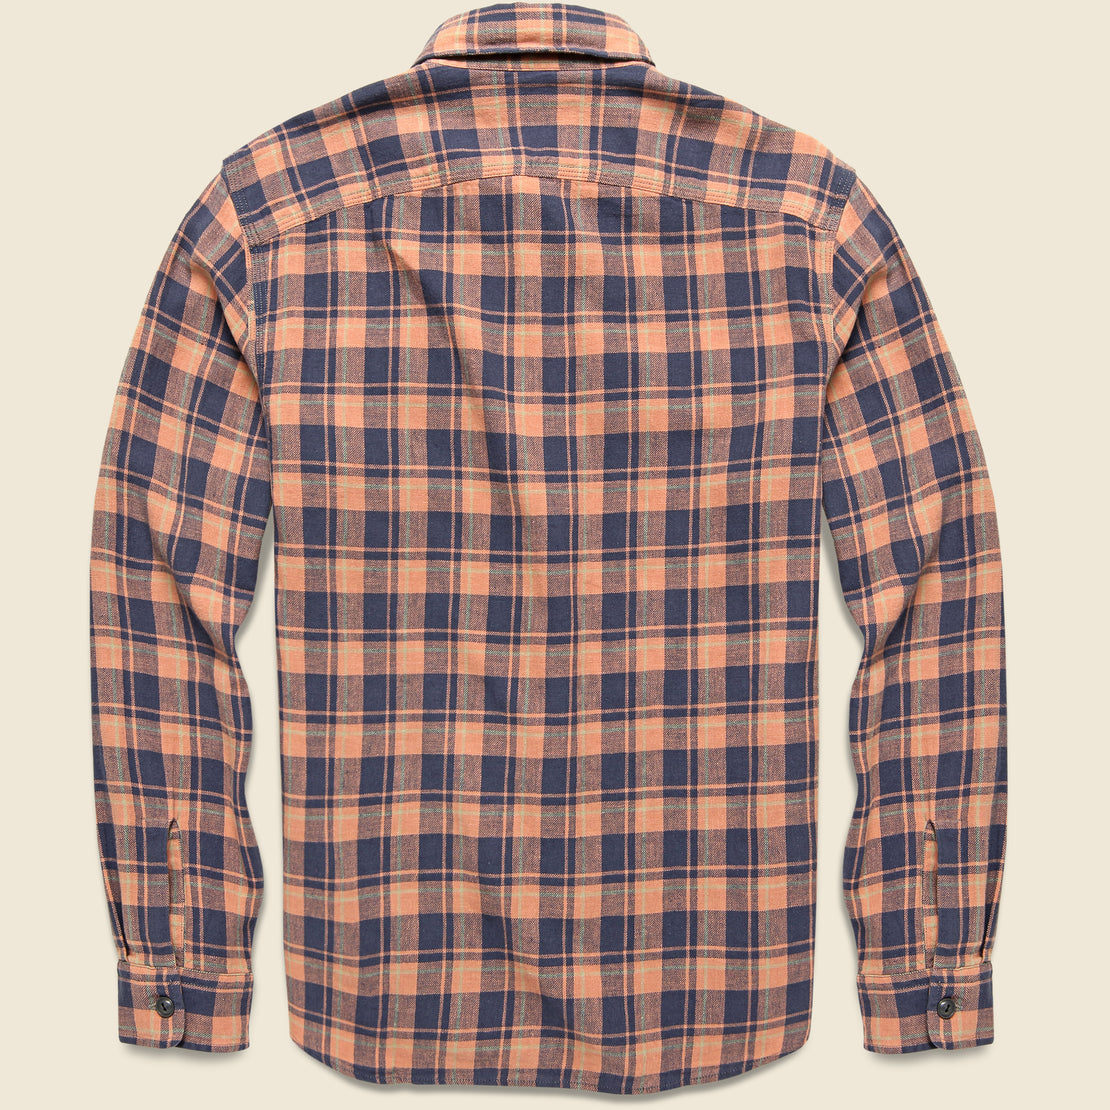 Sunfaded Plaid Matlock Workshirt - Coral Indigo - RRL - STAG Provisions - Tops - L/S Woven - Other Pattern